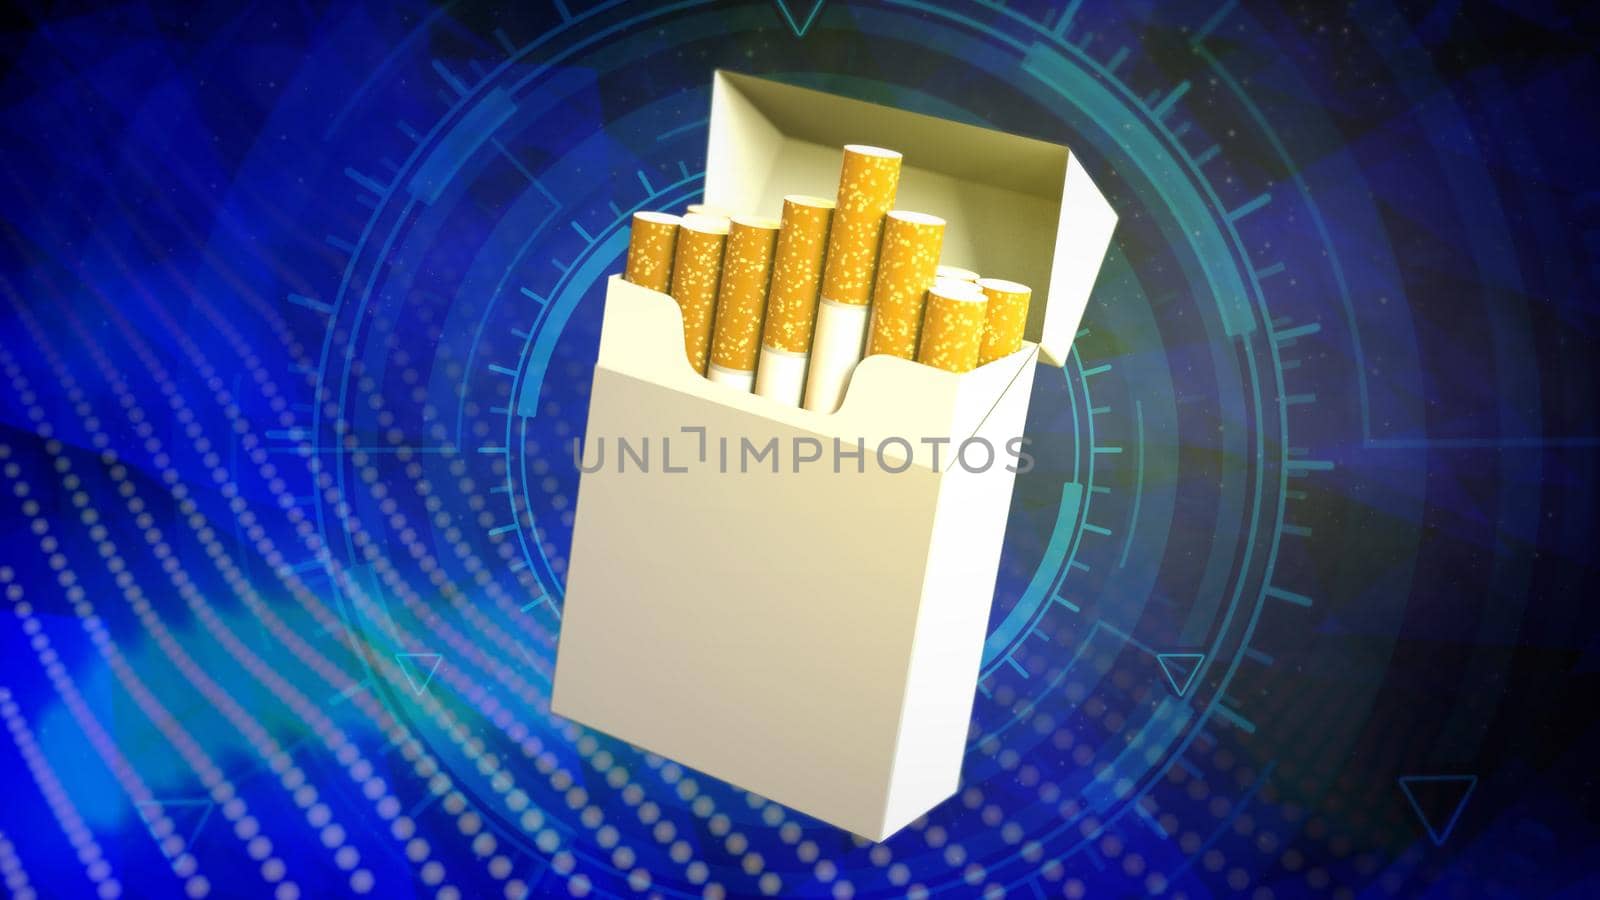 3D illustration of object - cigarette box on modern background - quit tobacco concept by Antozzr